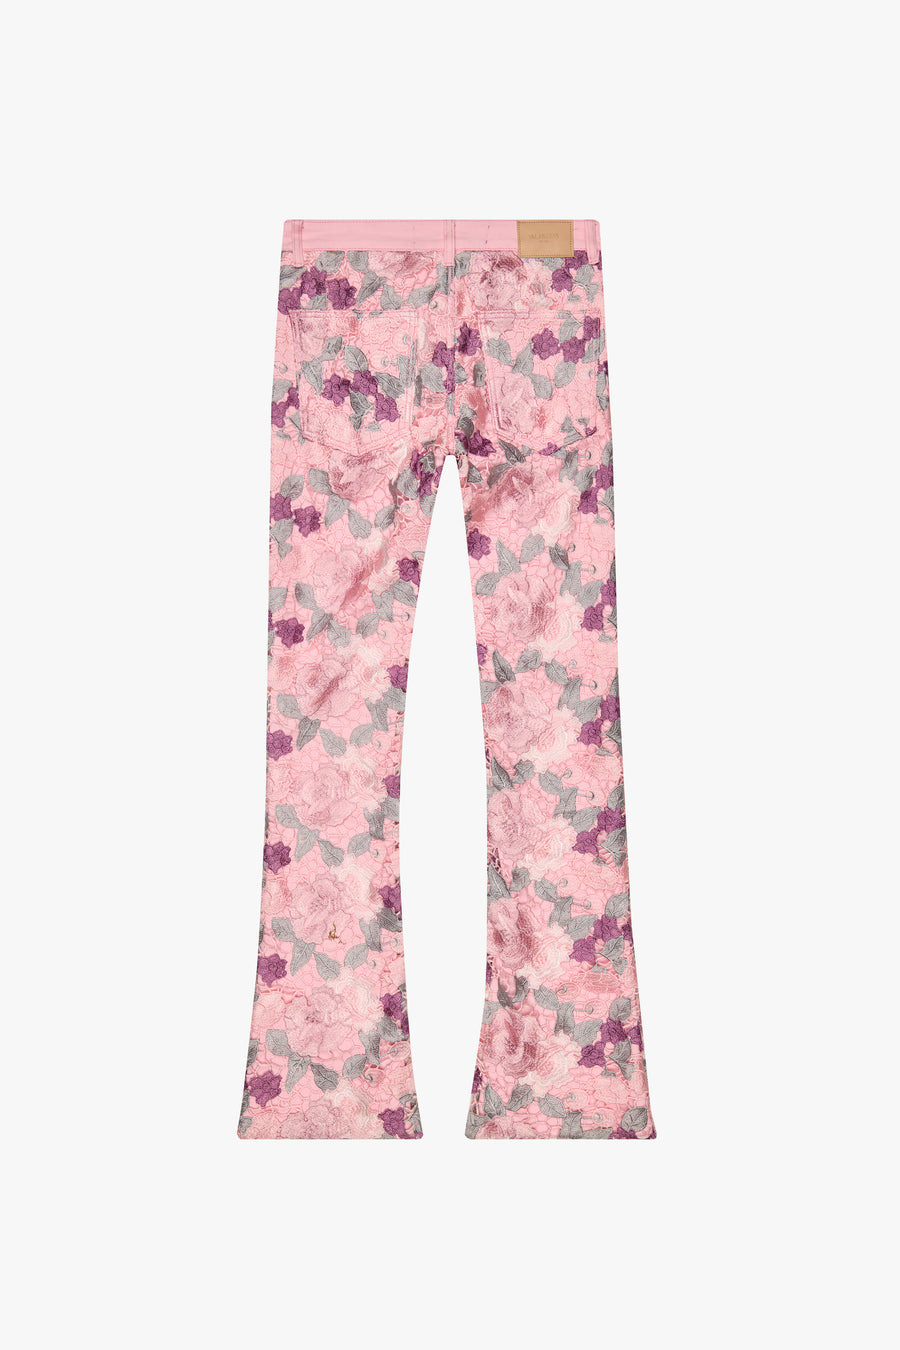 "HONEYCOMB" LAVENDER BLUSH STACKED FLARE JEAN